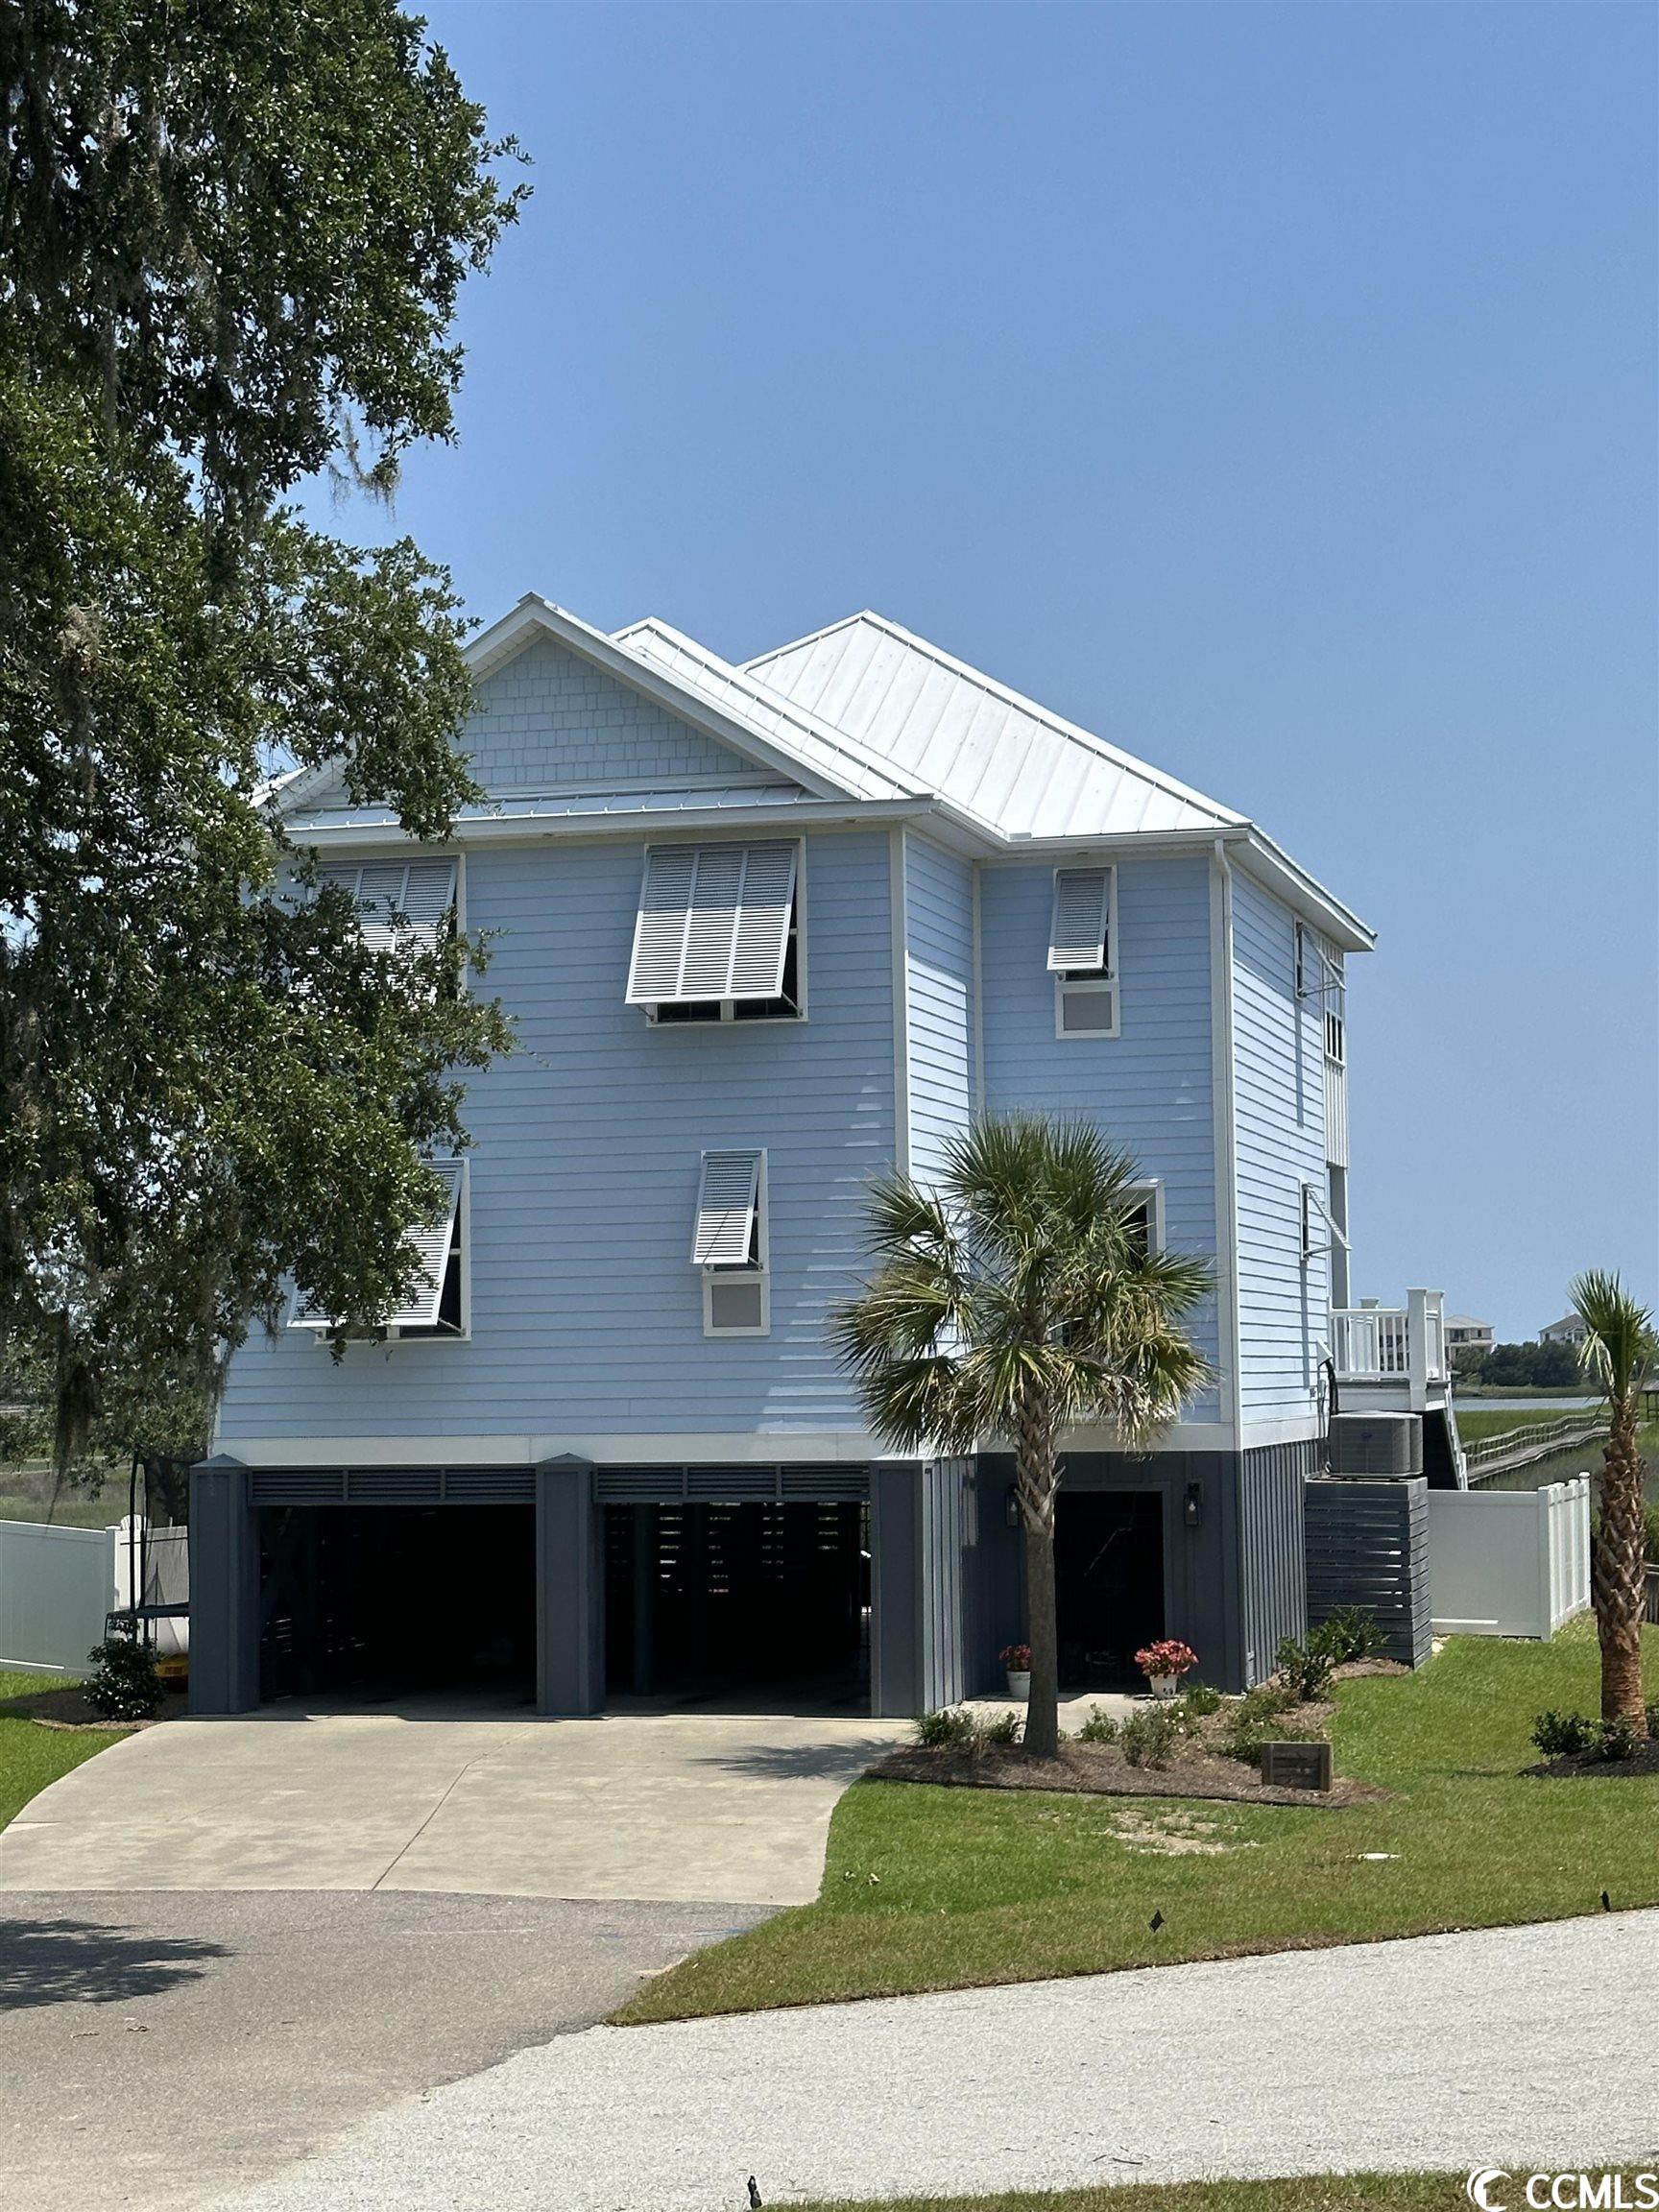 come fall in love with an unobstructed view of midway inlet and ocean views of south litchfield and north pawleys with this creekfront home! enjoy a panoramic view of the sunrise, bald eagles, thunderstorms, and much more from the comfort of your home. this custom home is built on driven pilings and offers 4 bedrooms, 3 baths and a bunkbed nook to accommodate many guests. the spacious master suite includes a trey ceiling, large custom closet, shower with body jets, sitting area and private deck. open concept design, custom cabinetry, crown molding, 3/4 inch hardwood flooring, standing seam metal roof, storm protection for all exposed windows and doors, an elevator serving all floors, outdoor shower and much more. 5 min drive to pawleys or litchfield beaches. there is a community dock that is shared by 3 other lots. plenty of storage under this raised style house with pool and private gate to the dock.